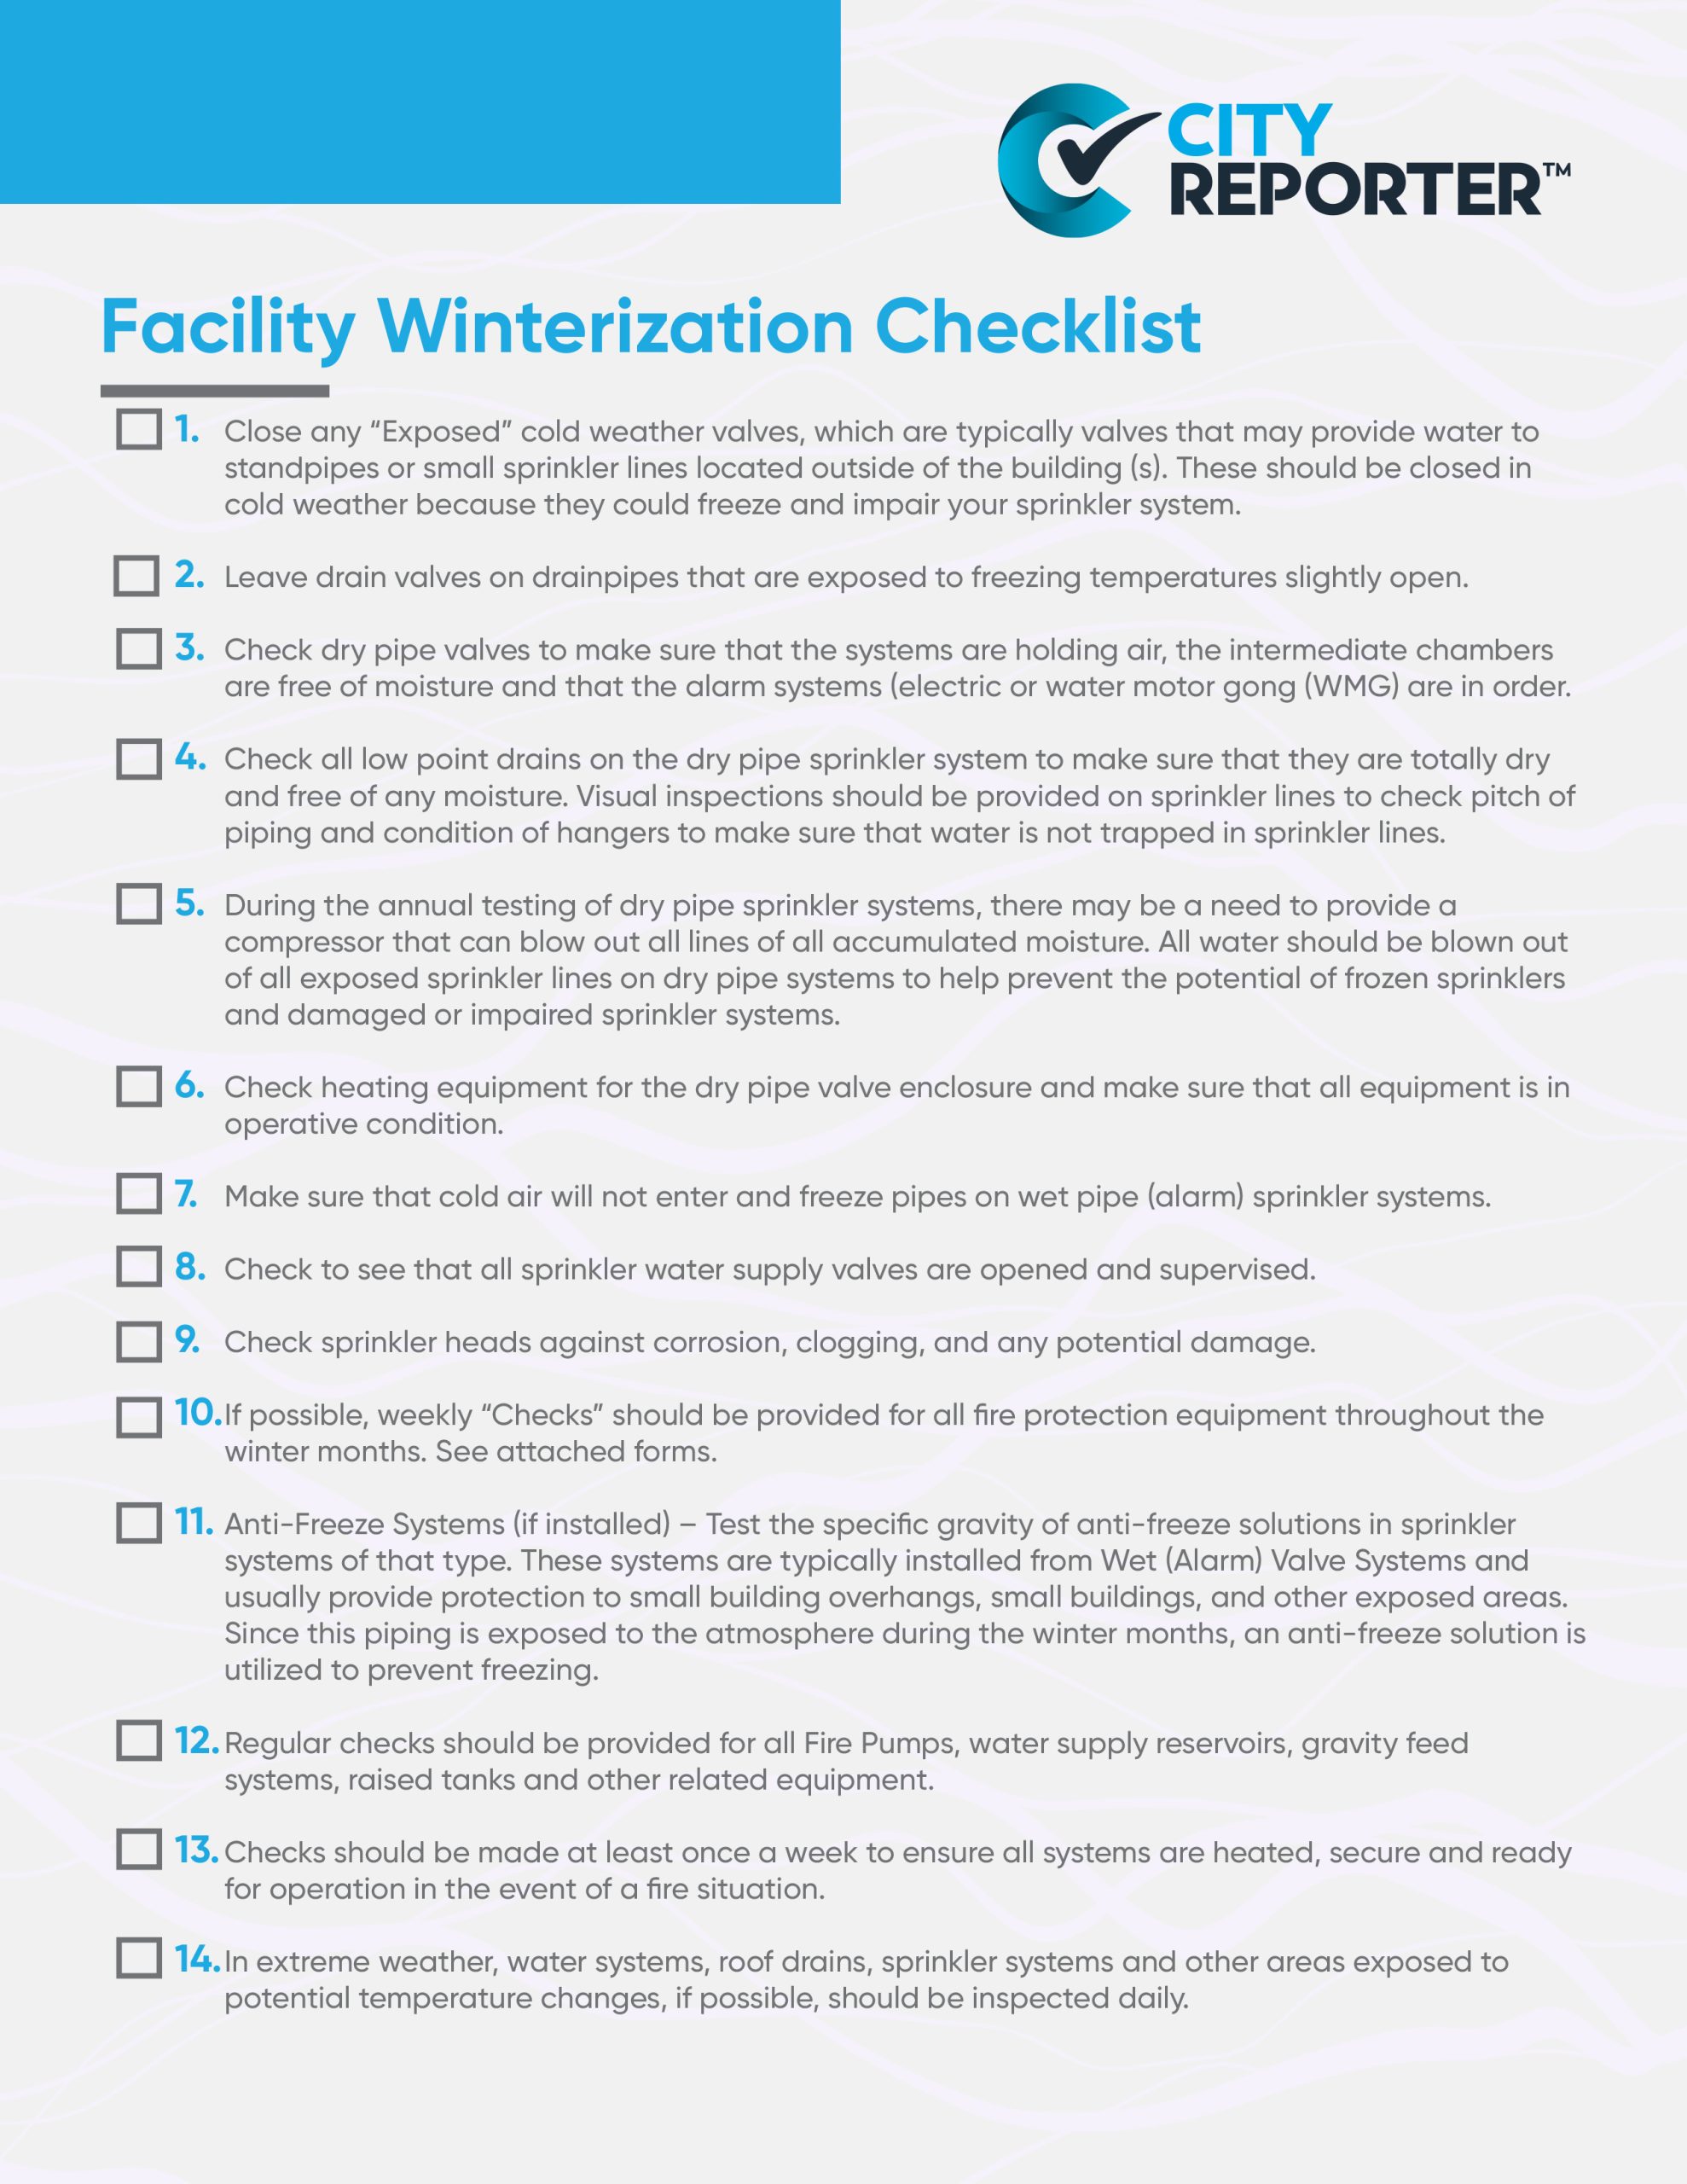 The first page of CityReporter's form - Winterization Checklist